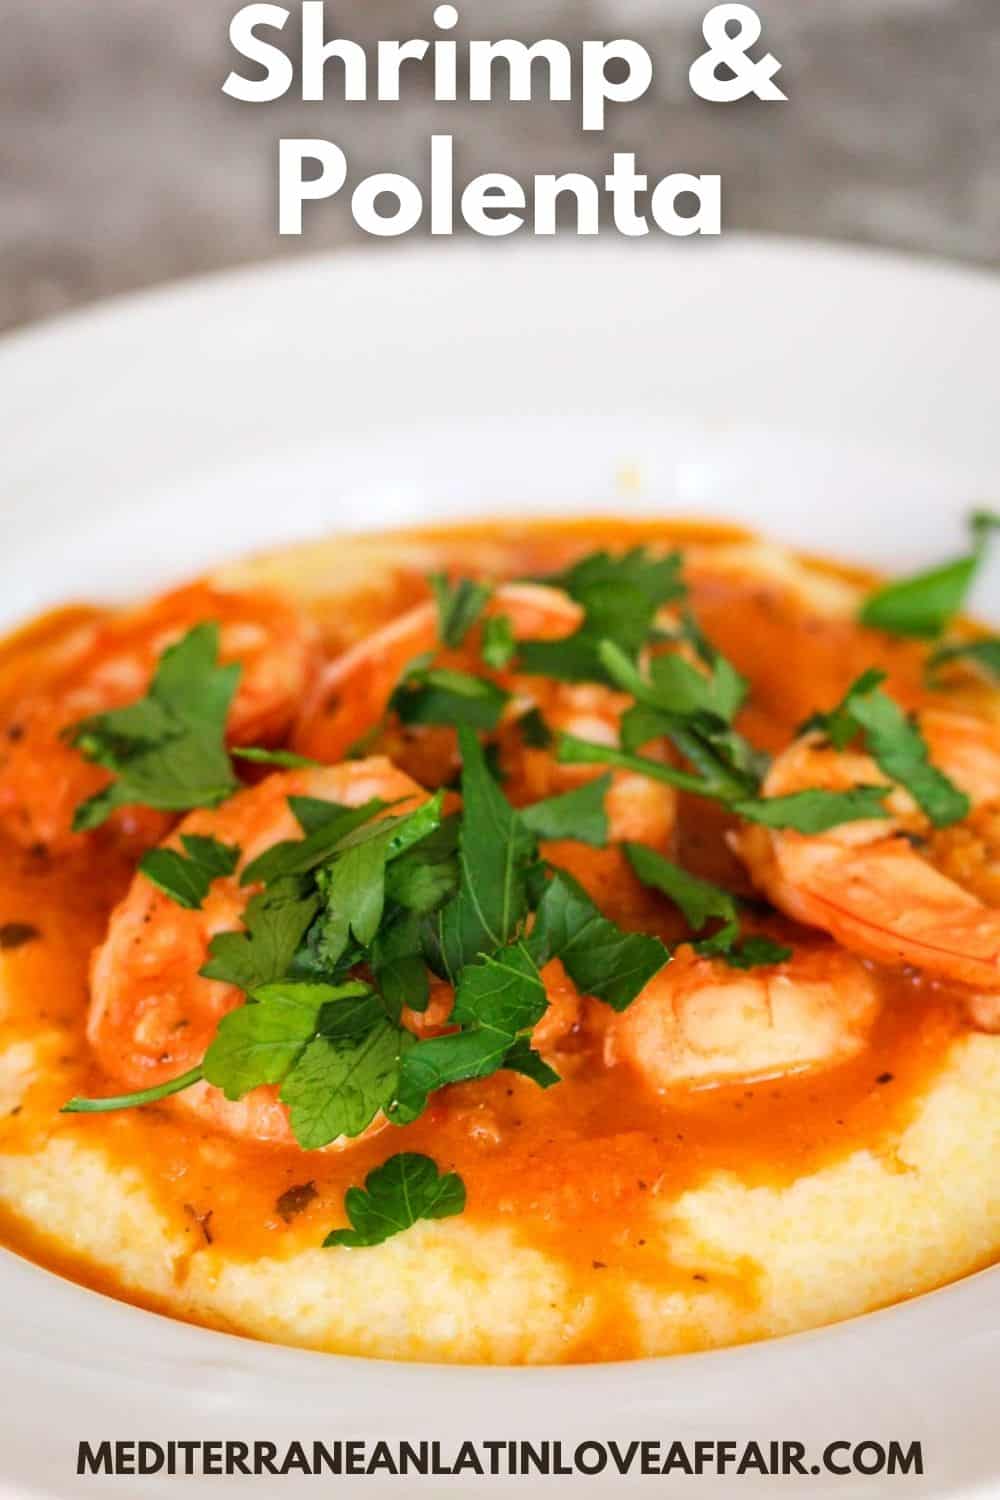 Shrimp and polenta dish - food is already served on a white, round plate. This image is prepared for Pinterest because beside the image of food it shows a title bar on top and the website link in the bottom.